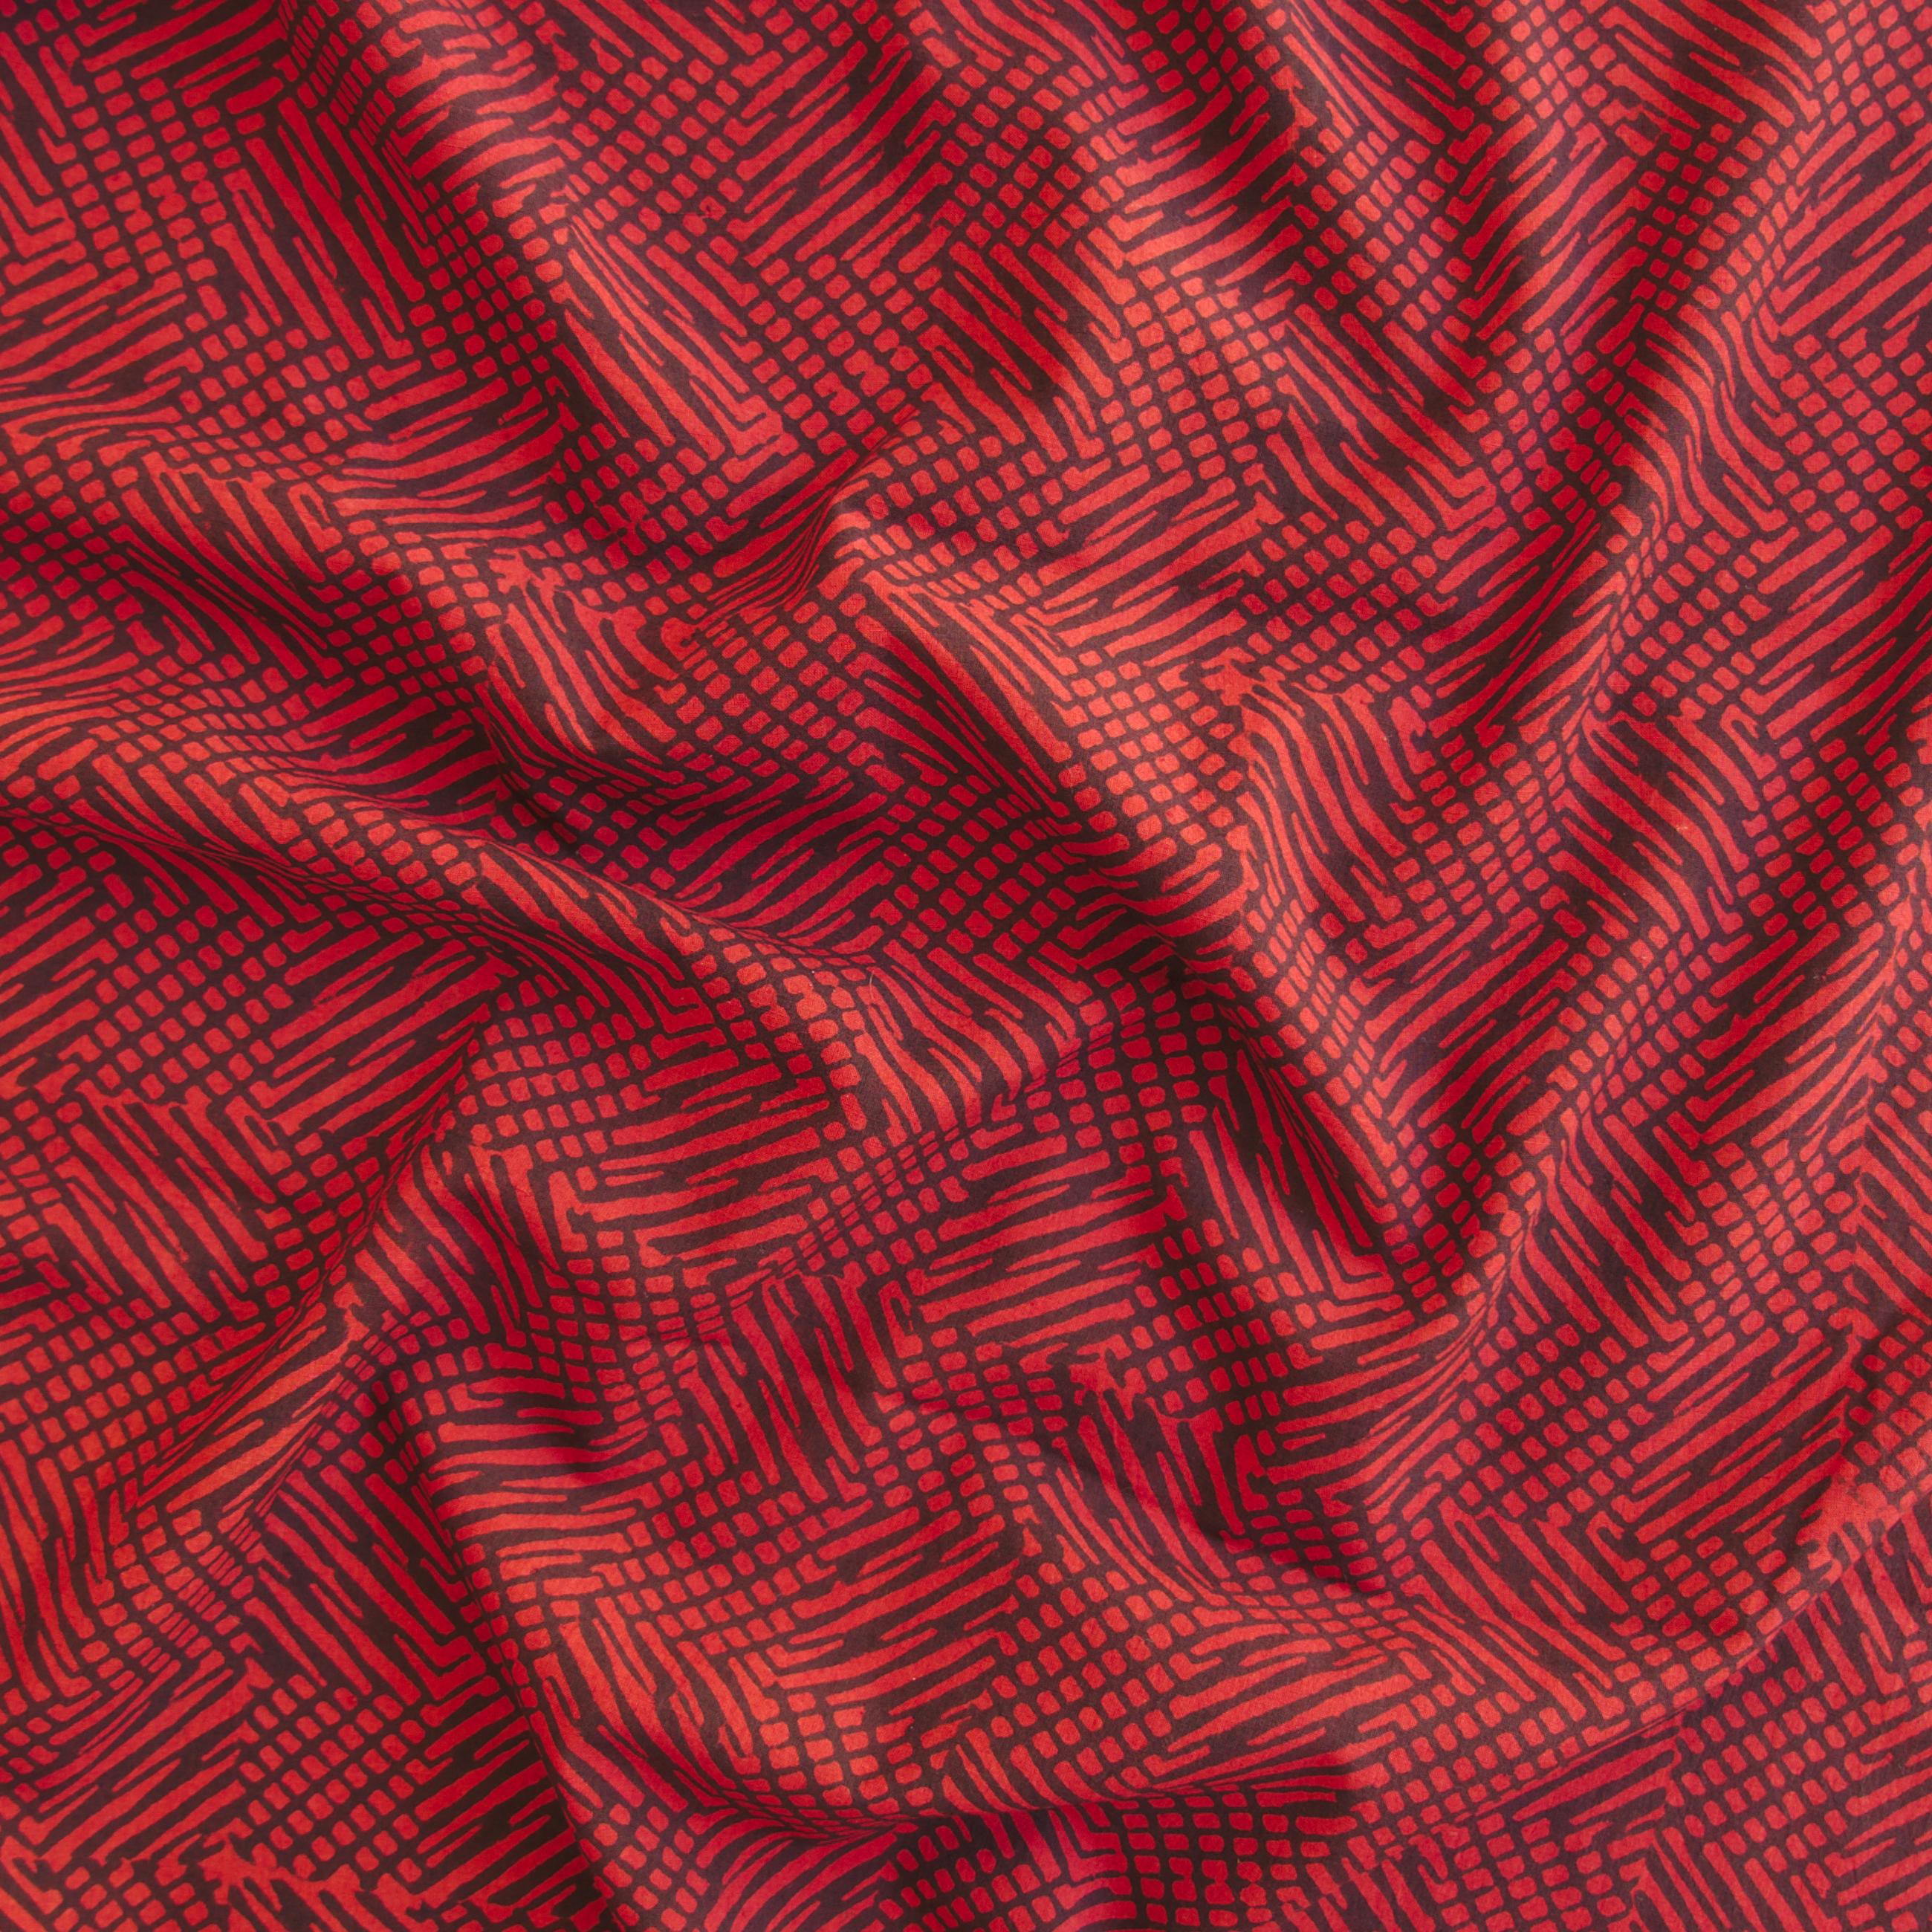 SIK29 - Block-Printed Cotton Yardage Sample - Squiggle Design - Black Iron and Red Alizarin Dye - Contrast